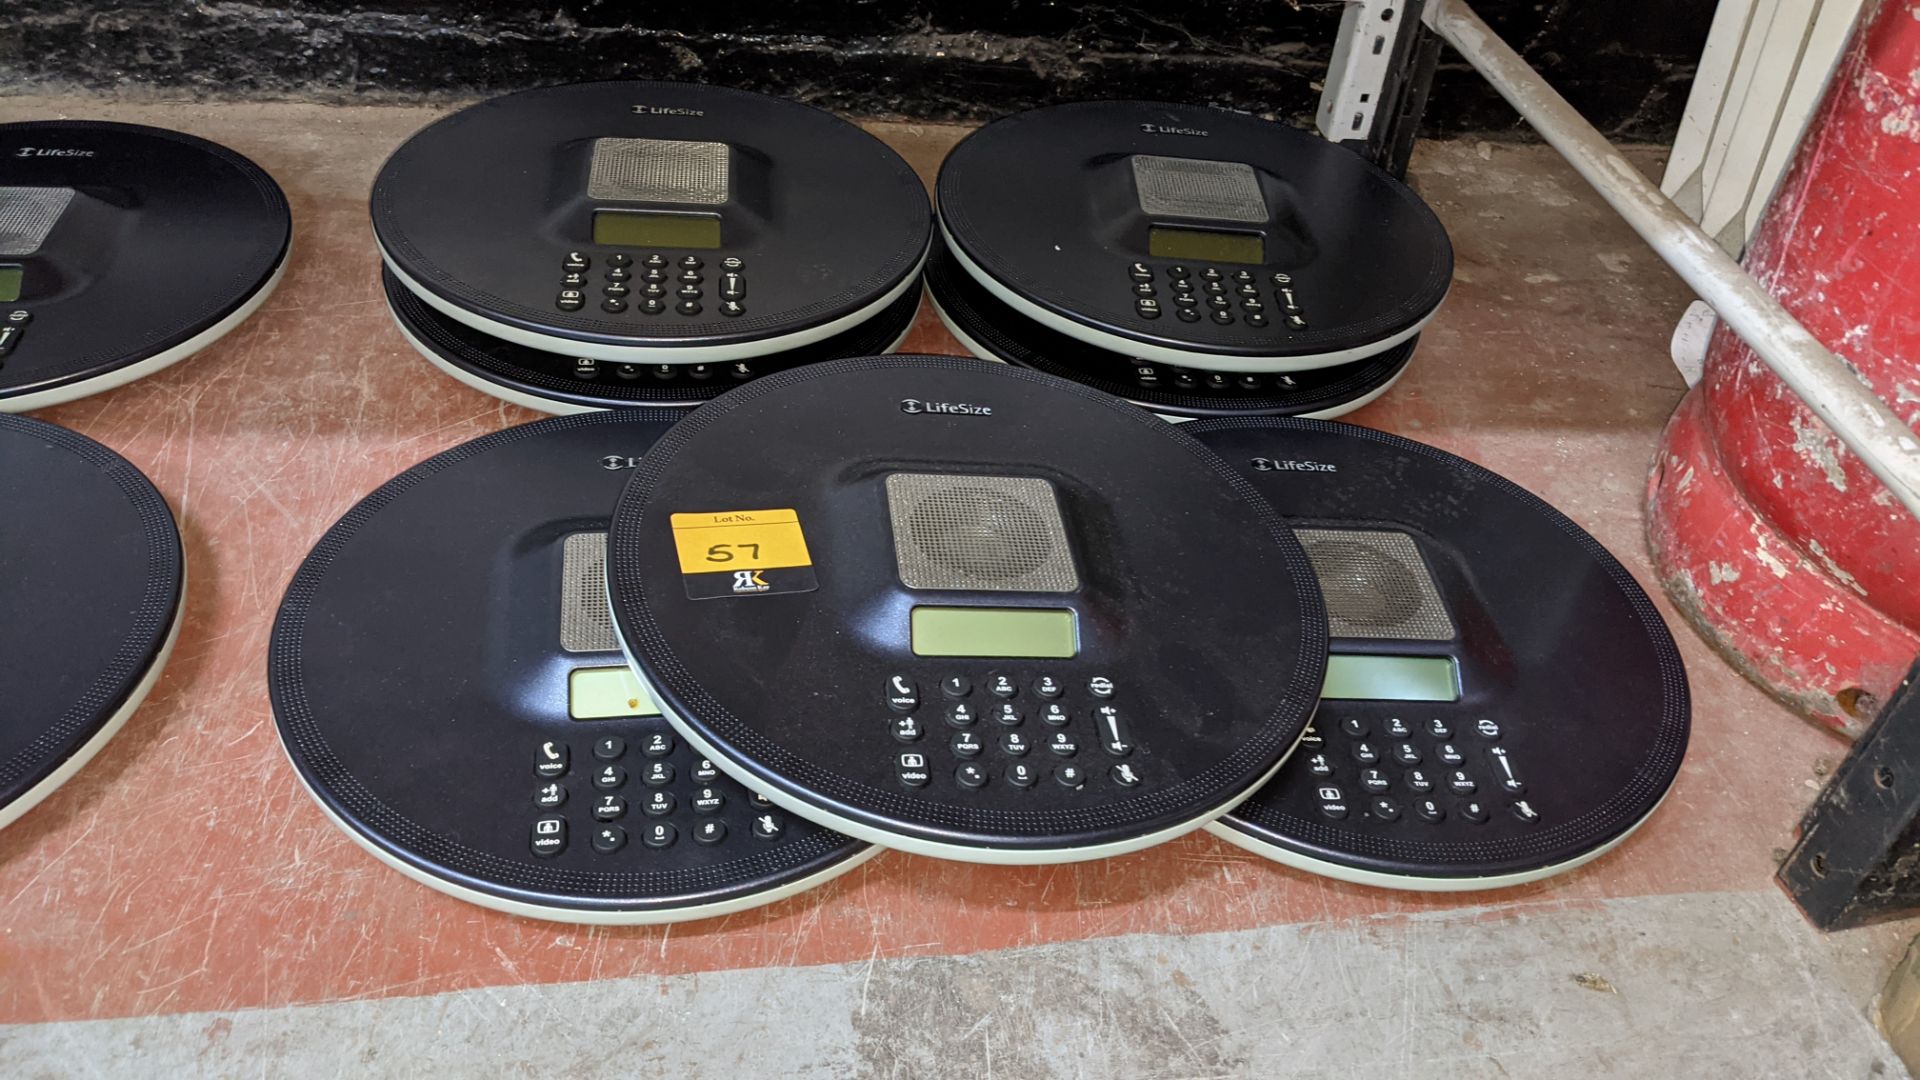 7 off LifeSize phones. NB lots 46 - 47, 53 - 57 & 88 all consist of LifeSize equipment